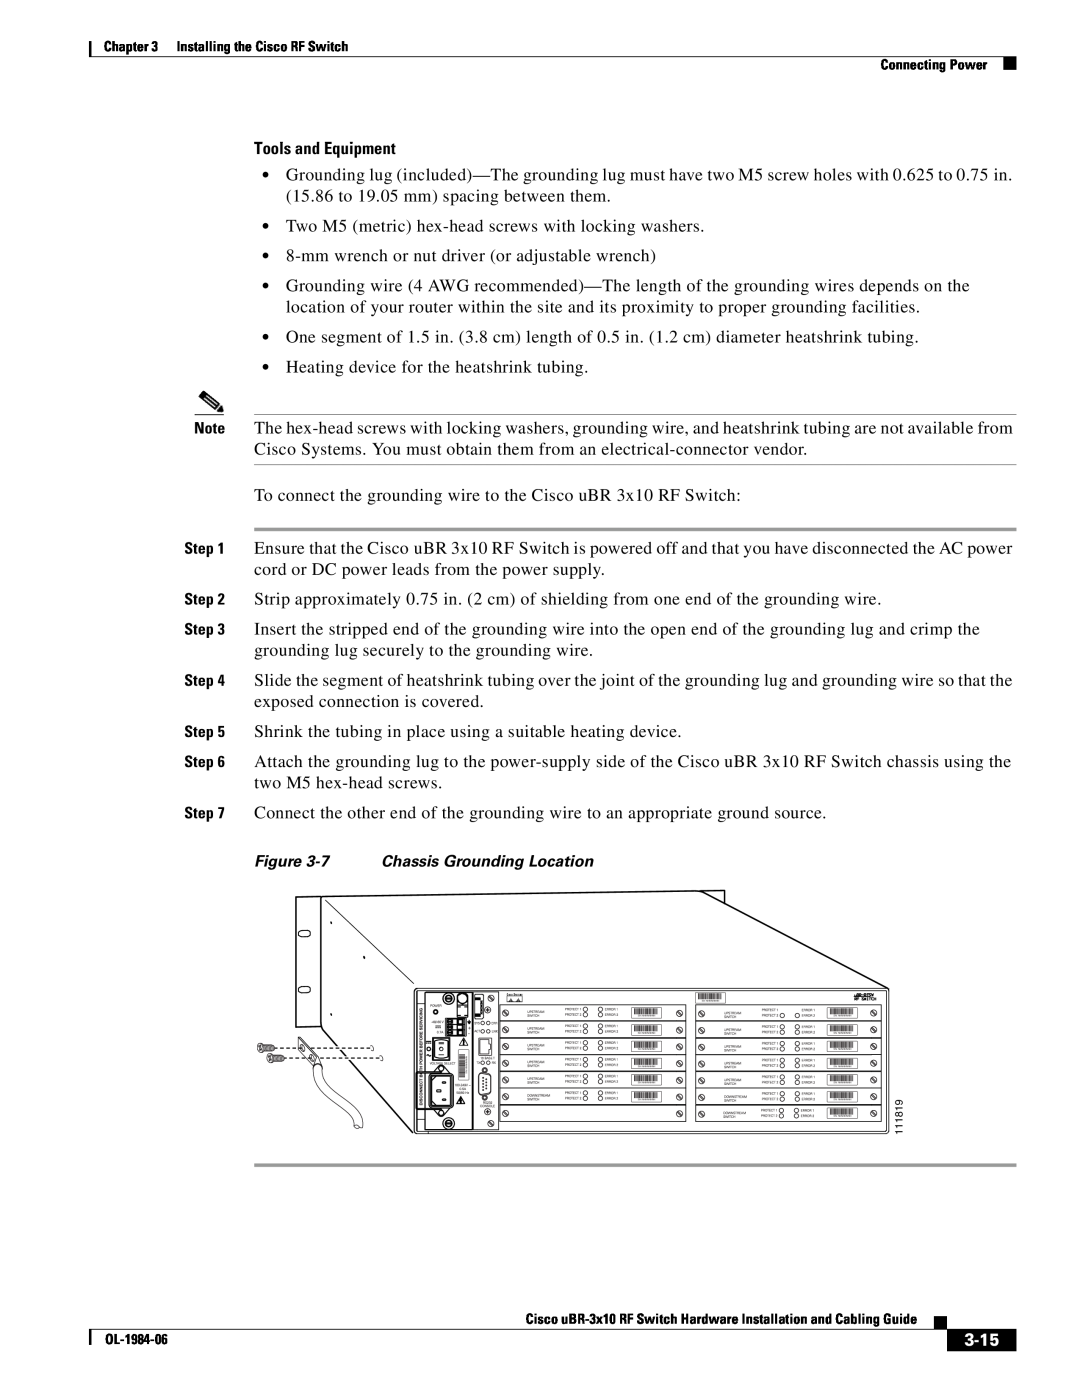 Cisco Systems UBR-3X10 manual 3-15, Tools and Equipment, 7 Chassis Grounding Location 